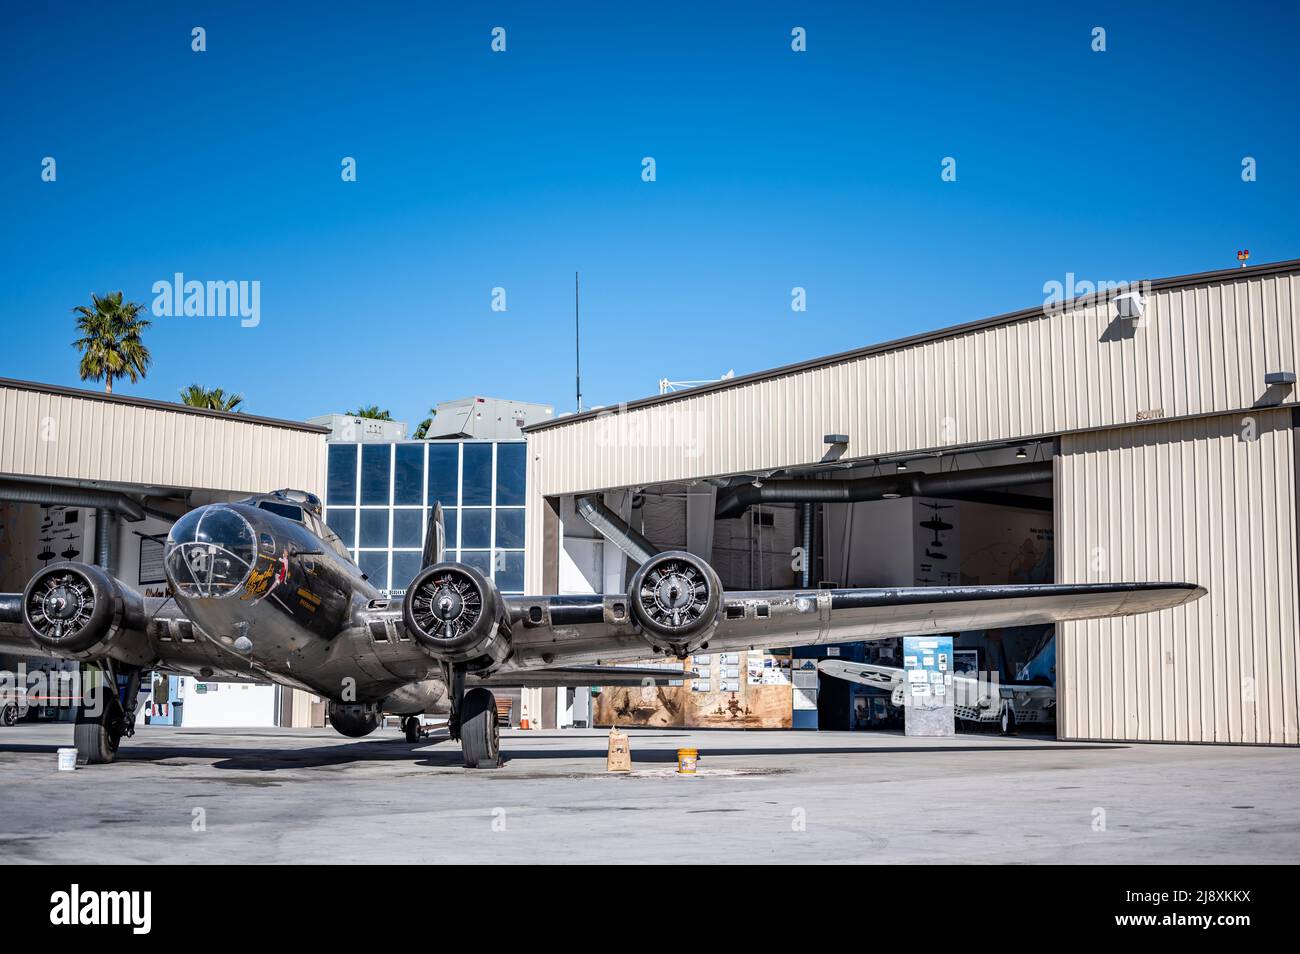 Palm Springs, California, USA - 2.2022 - Open hanger with airplanes at the Air Museum. Stock Photo